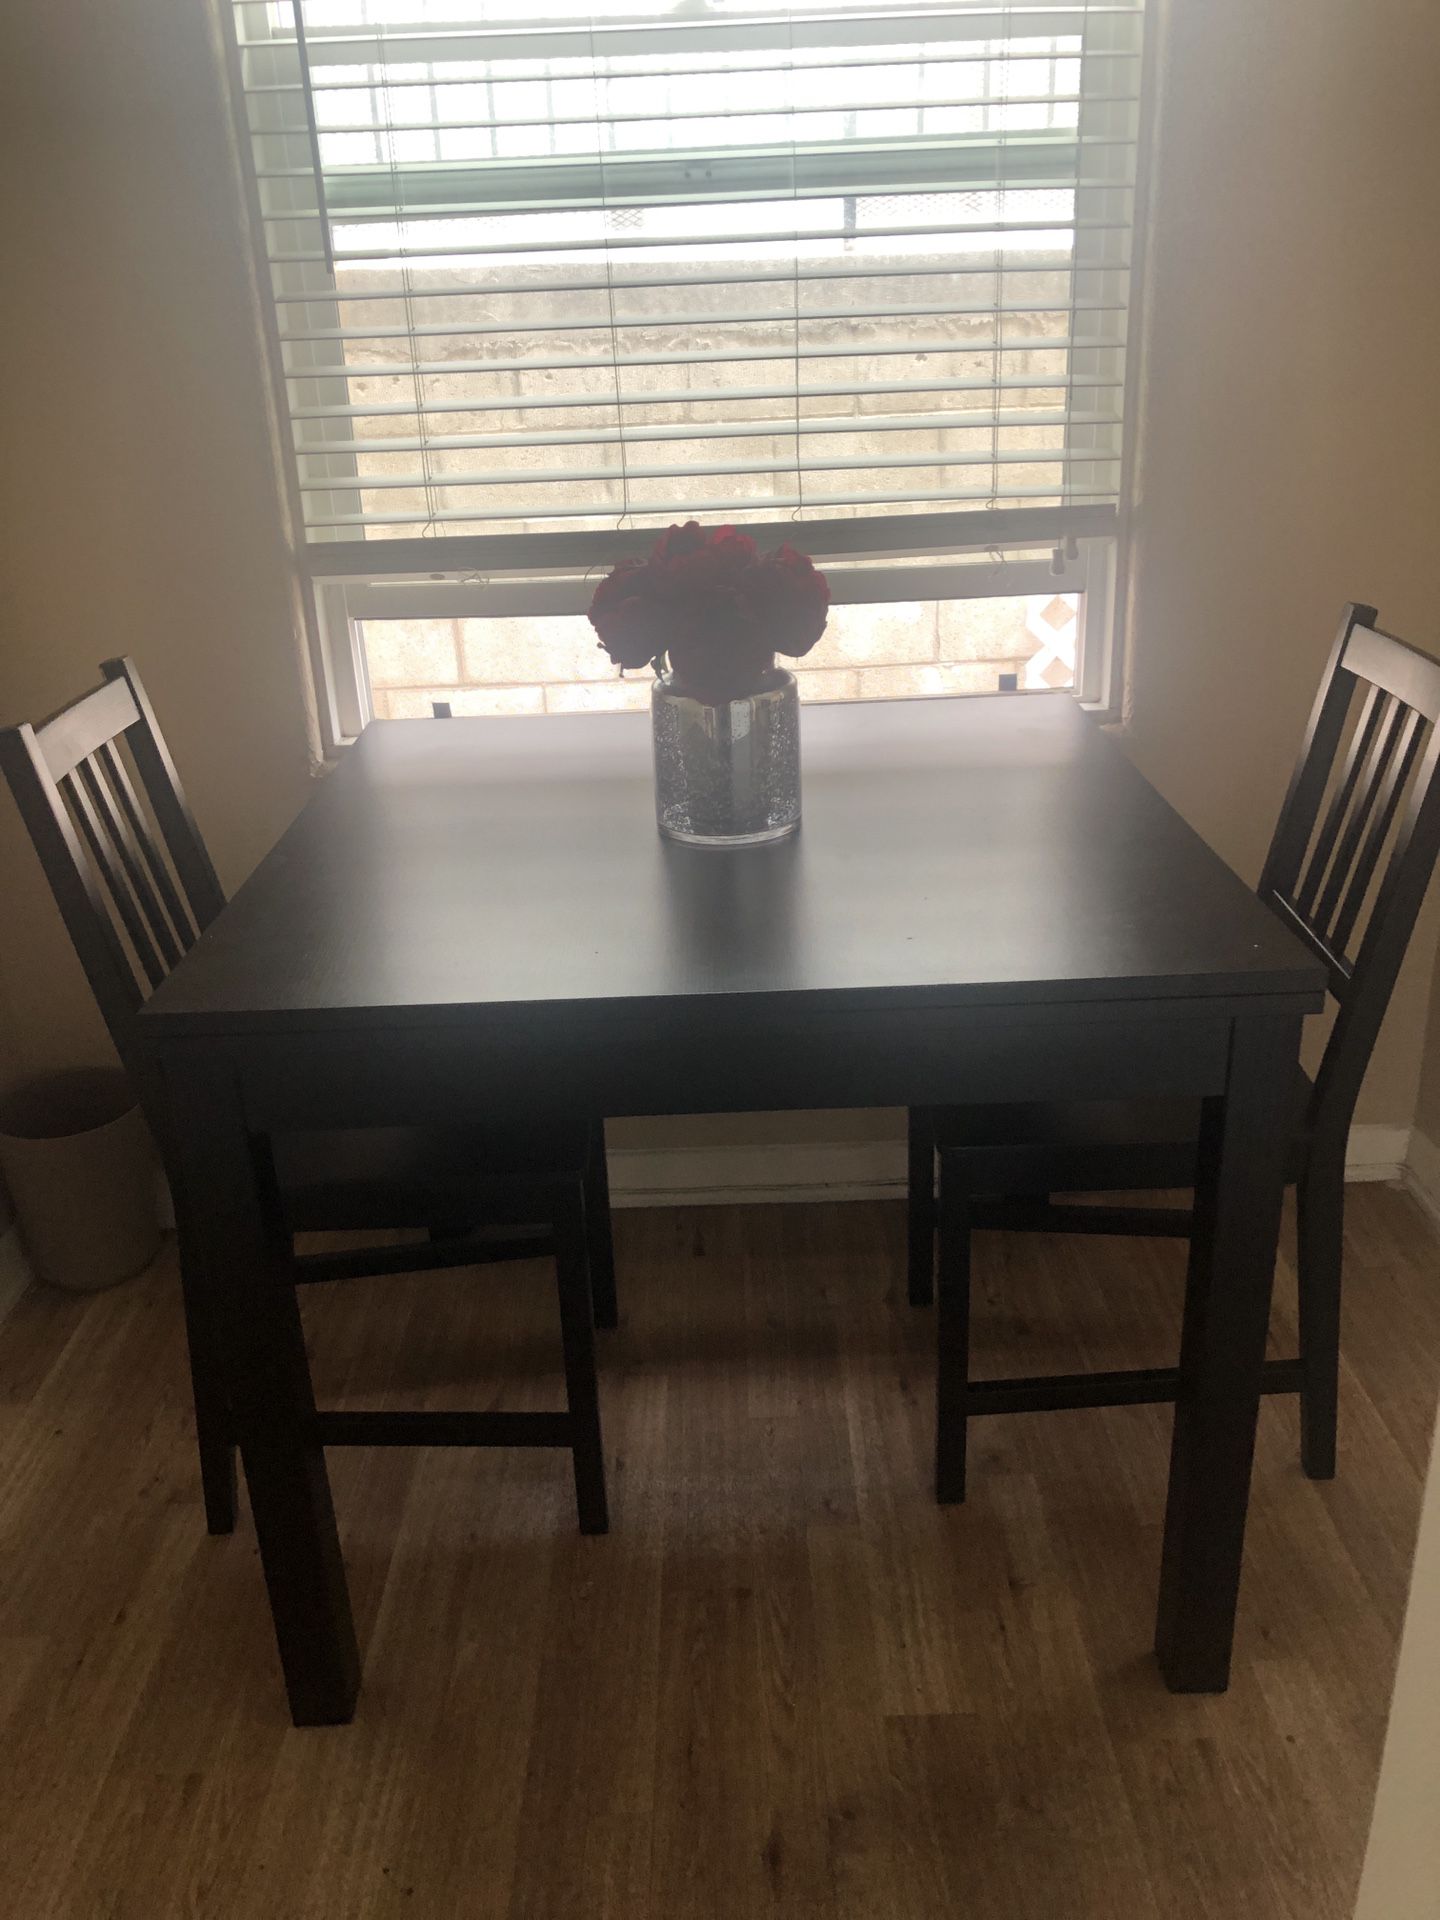 Entendable Kitchen Table with (2) Matching Chairs